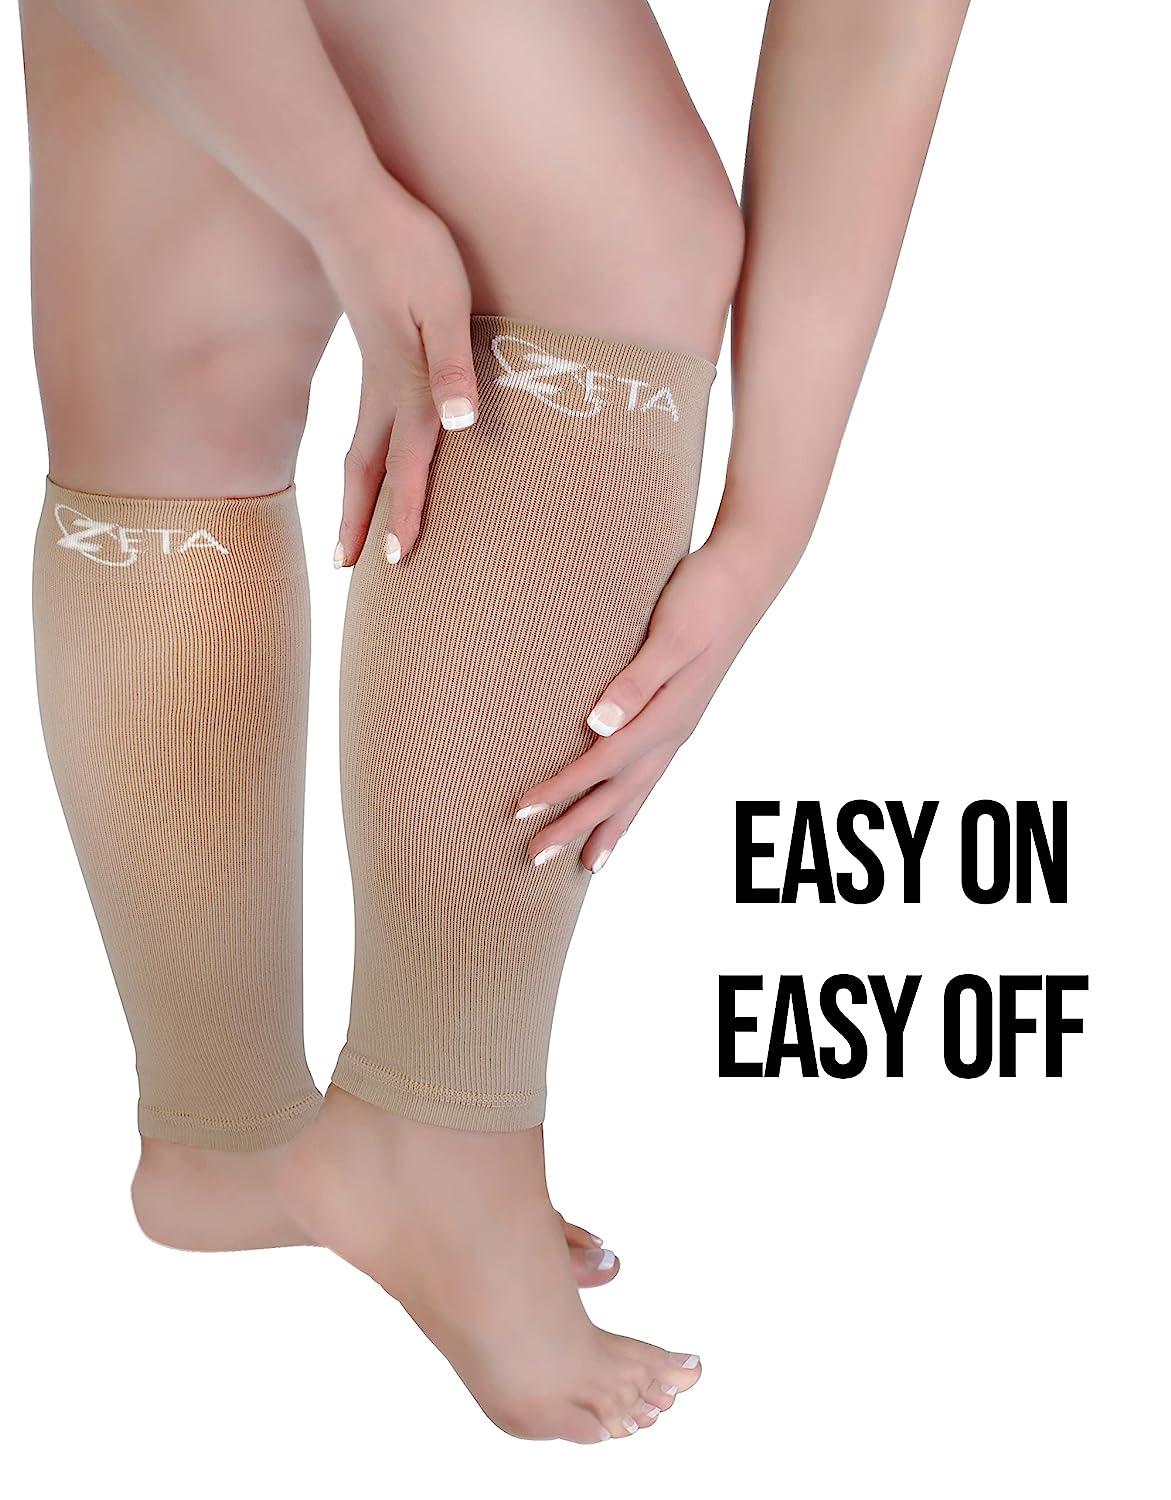 SHORT LENGTH, Plus Size Compression Calf Sleeves